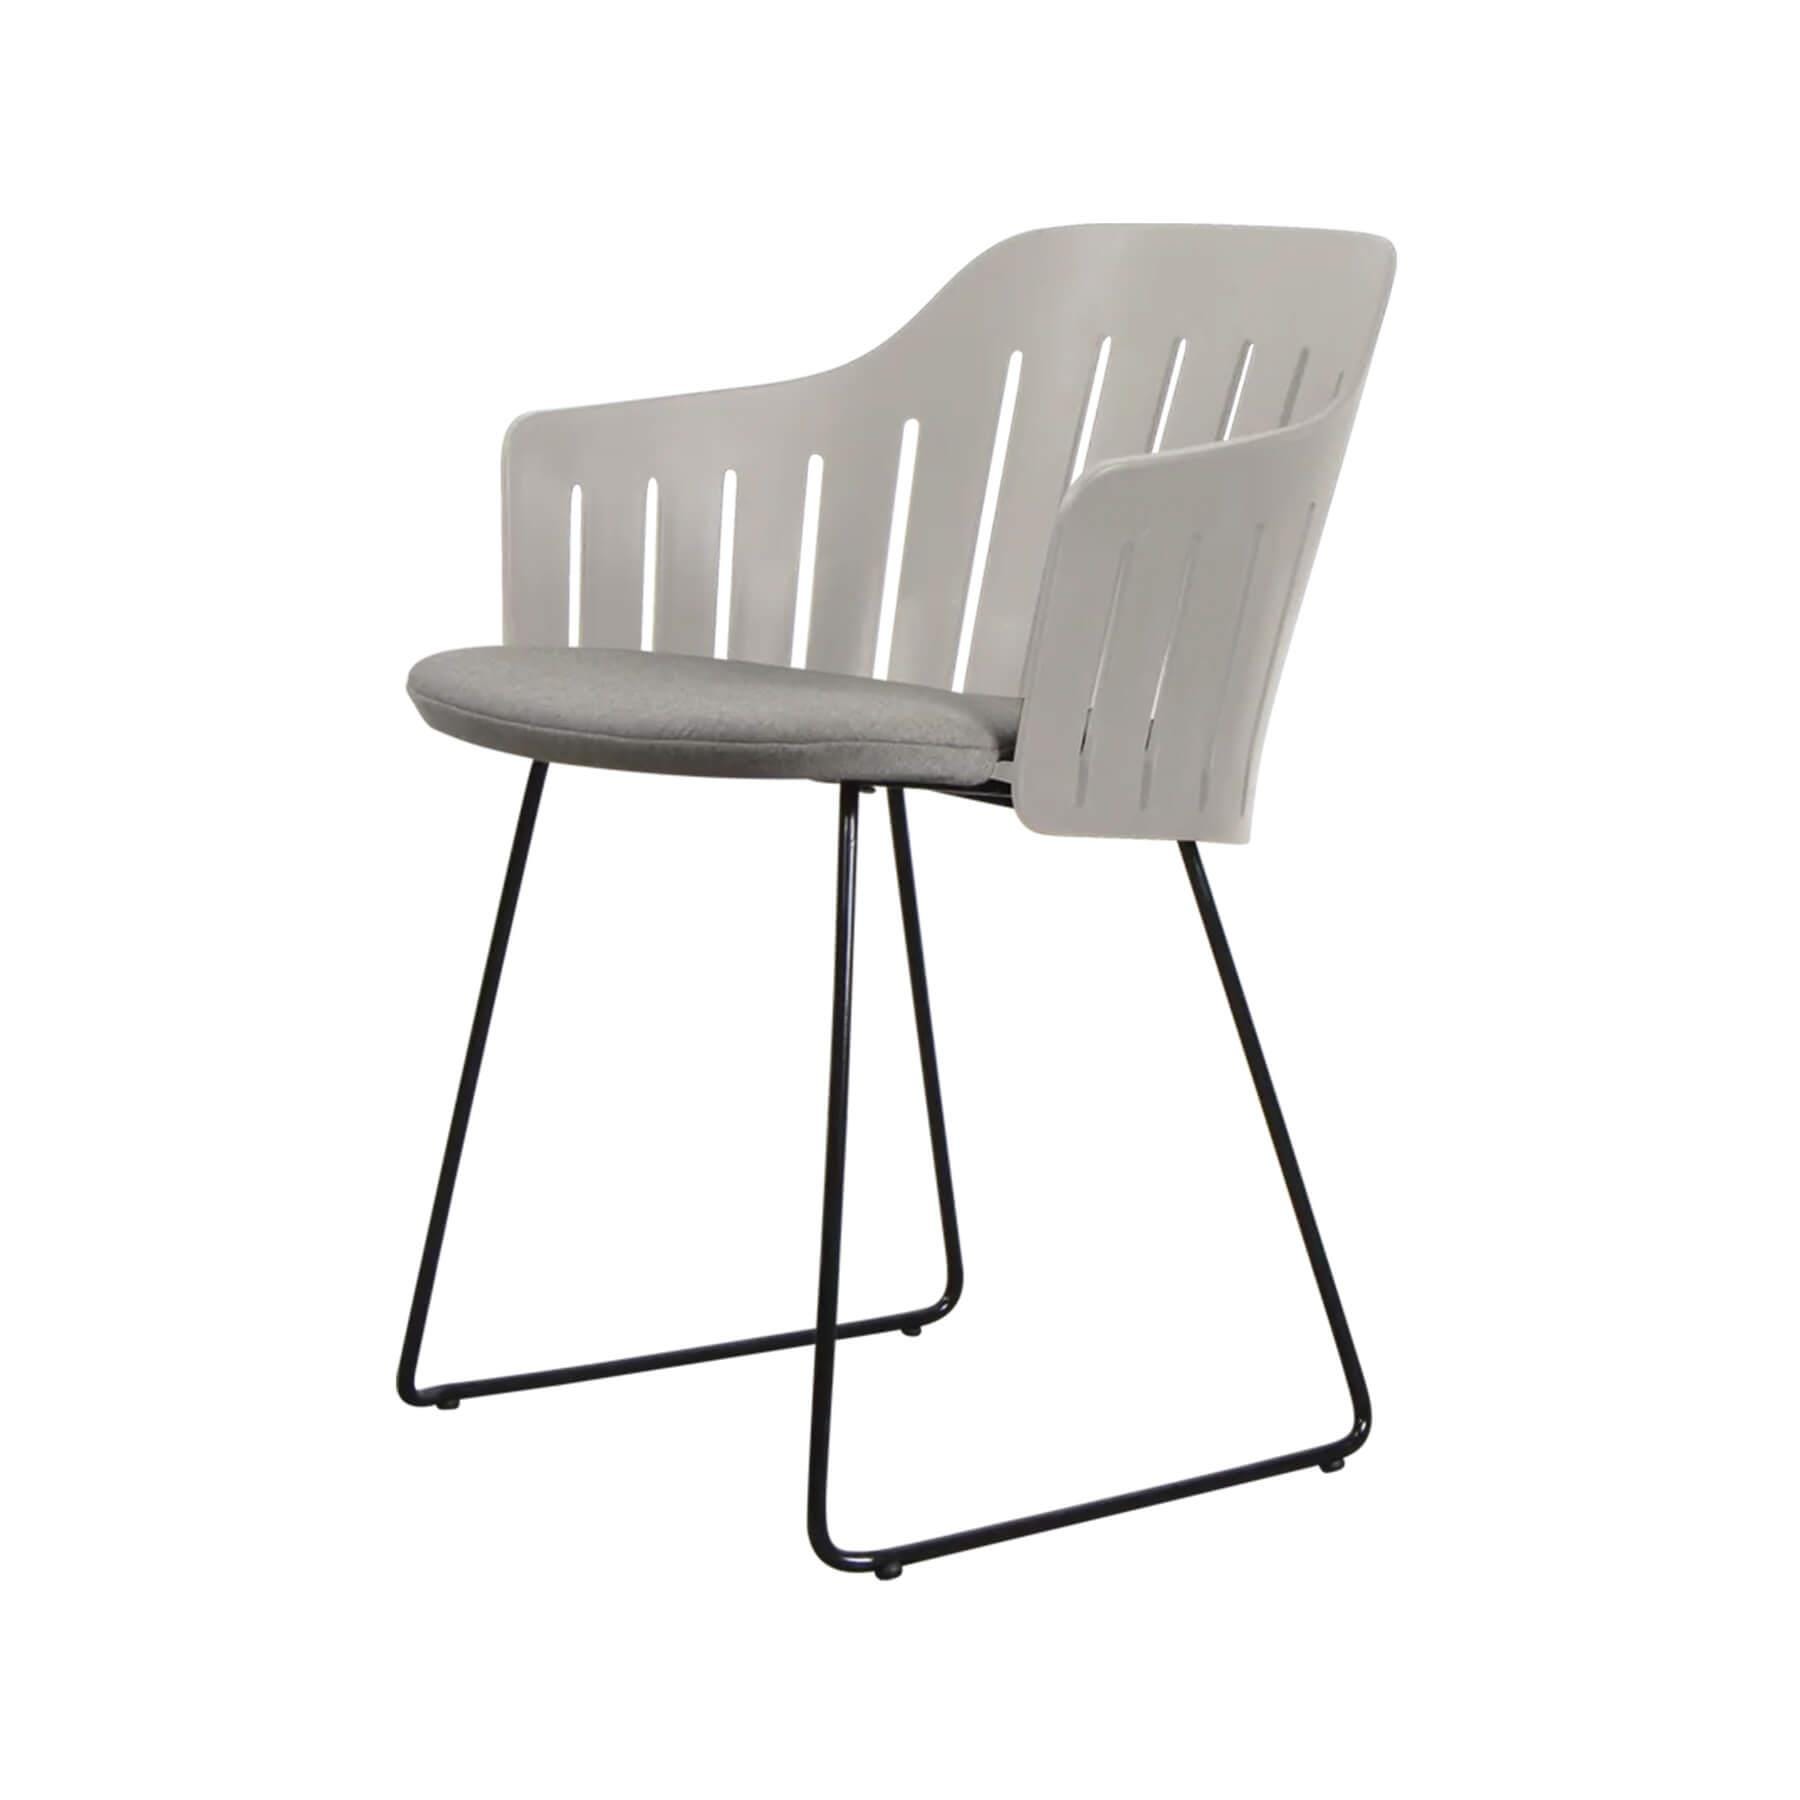 Caneline Choice Outdoor Chair With Steel Sled Legs Taupe Seat Natte Taupe Cushion Brown